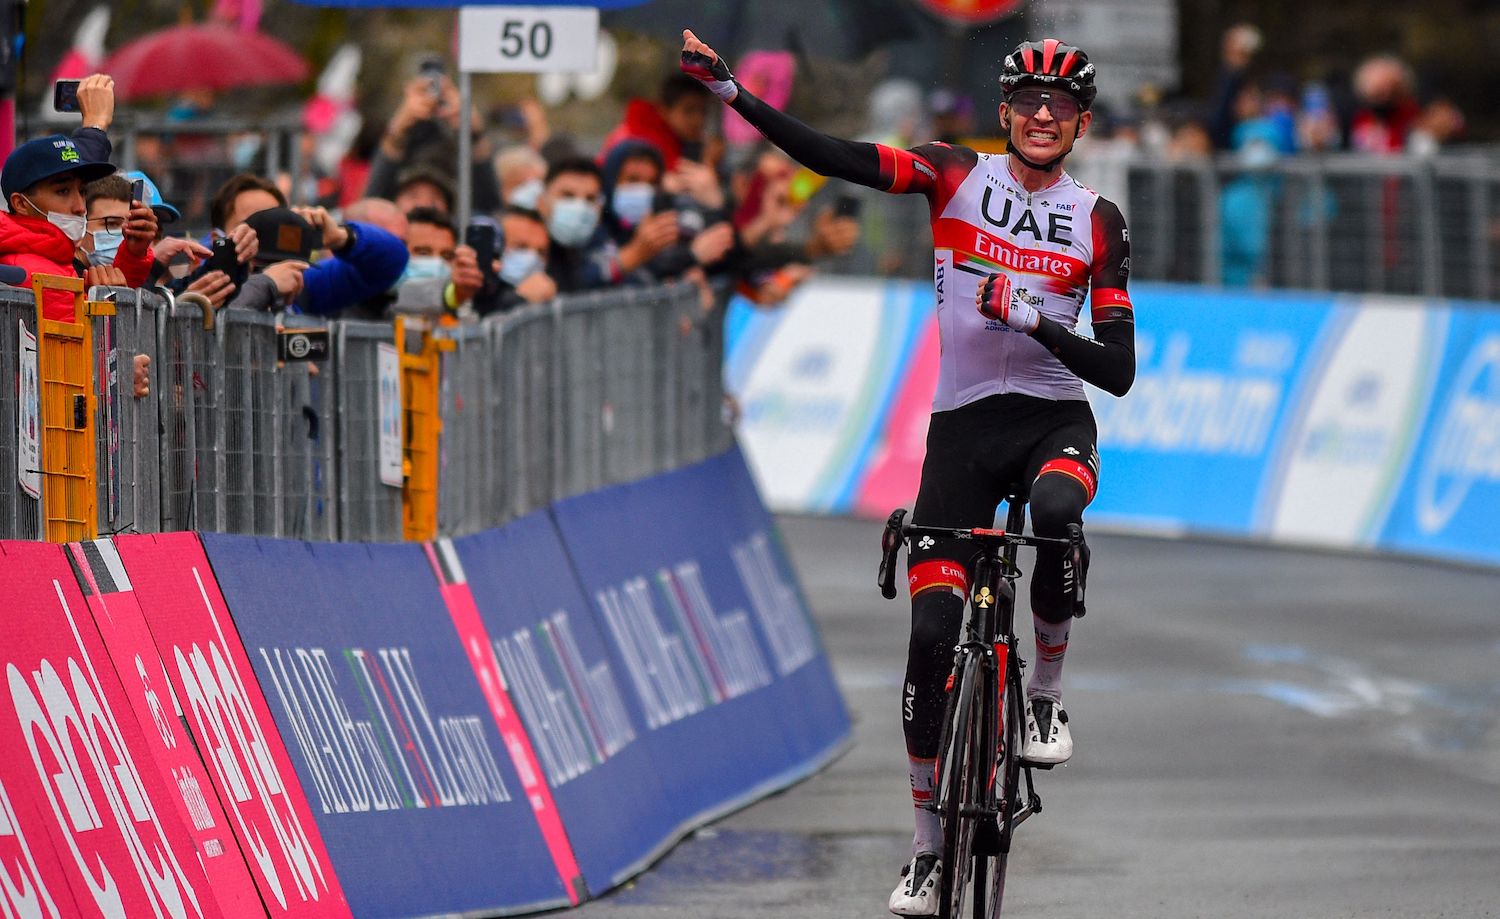 Team UAE Emirates rider US Joe Dombrowski celebrates as he crosses the finish line to win the fourth stage of the Giro d'Italia 2021 cycling race, 187 km between Piacenza and Sestola, Emilia-Romagna, on May 11, 2021. (Photo by Dario BELINGHERI / AFP) (Photo by DARIO BELINGHERI/AFP via Getty Images)